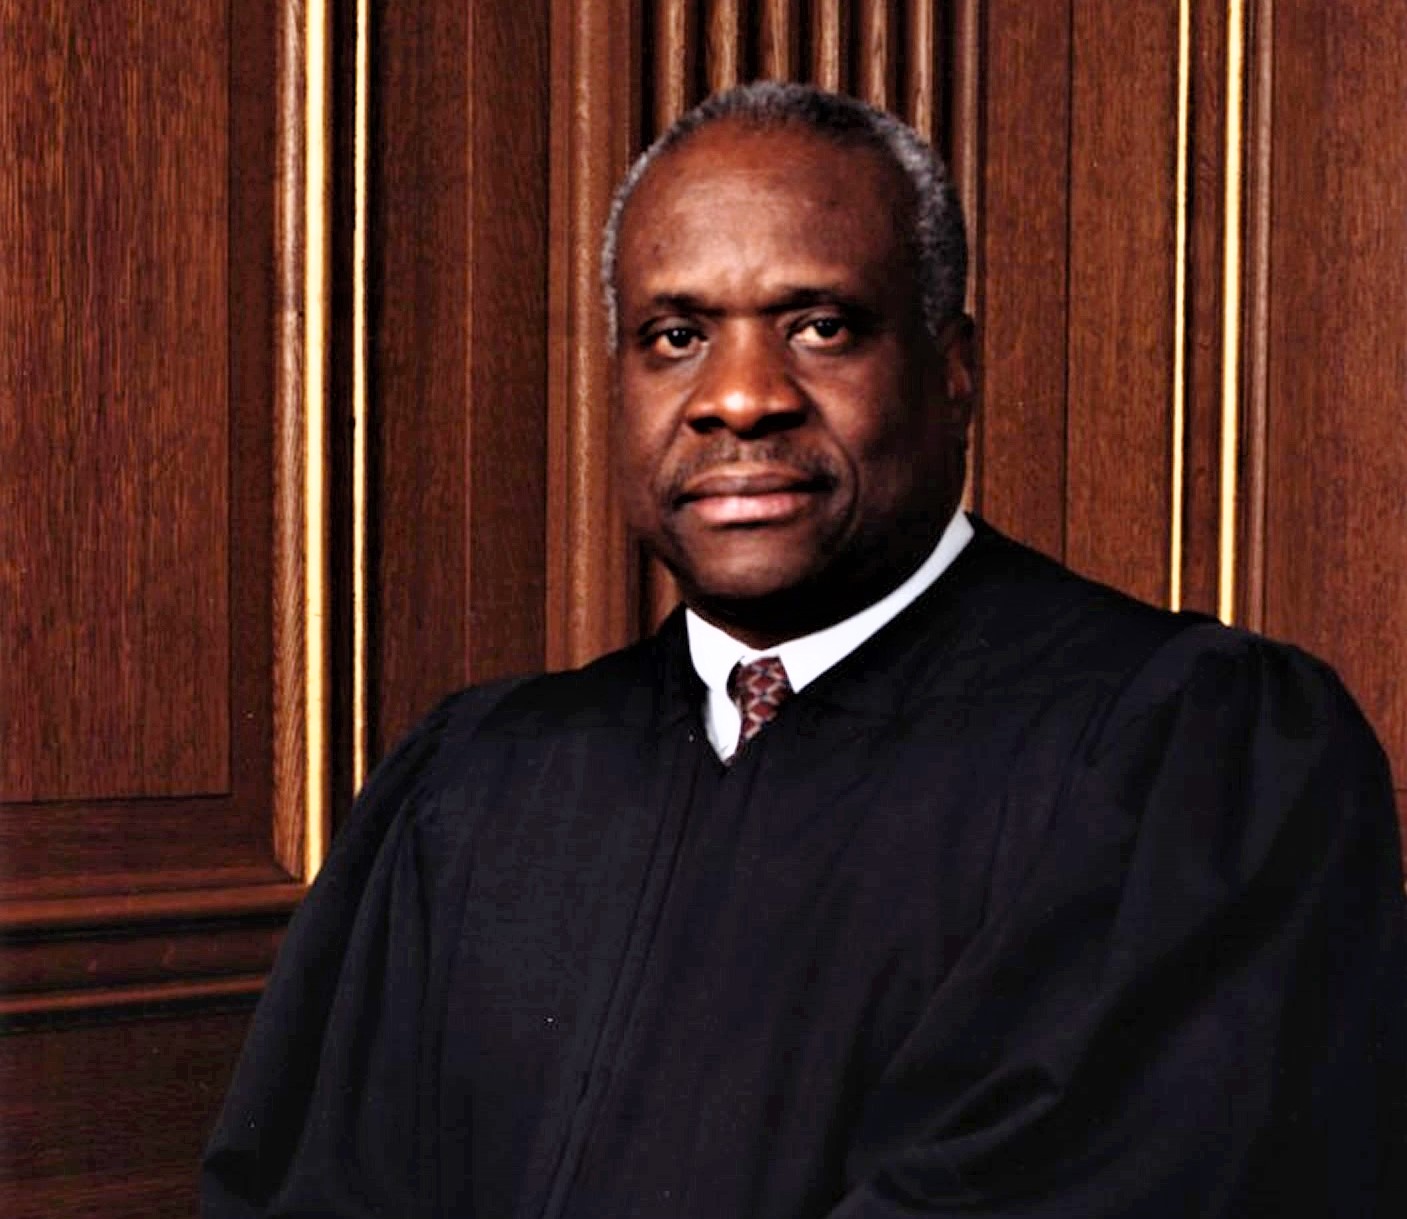 Justice Clarence Thomas discloses trips with billionaire in annual financial disclosure